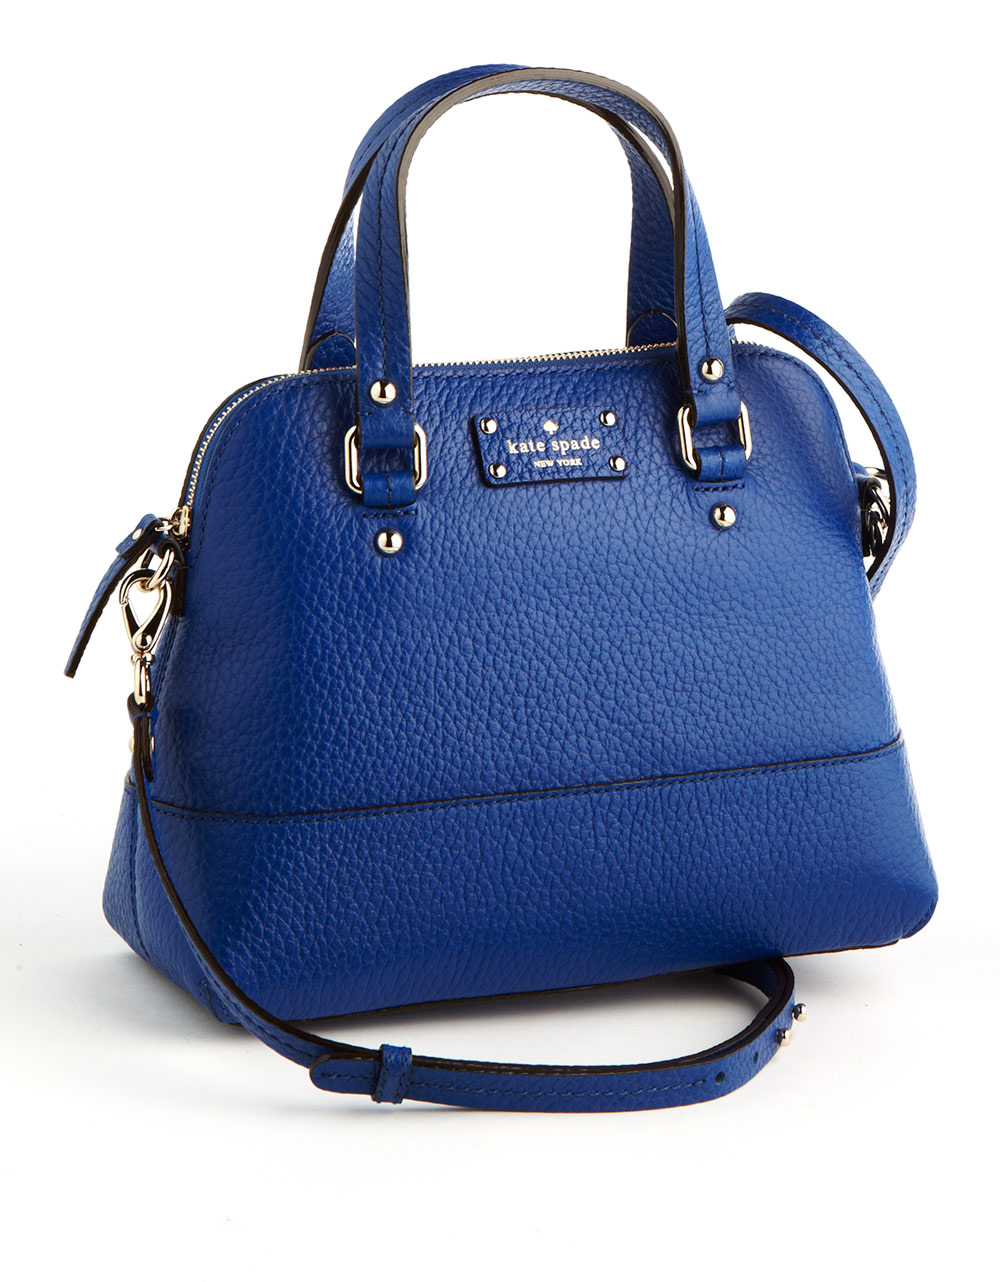 Kate Spade Maise Leather Satchel Bag in Blue - Lyst